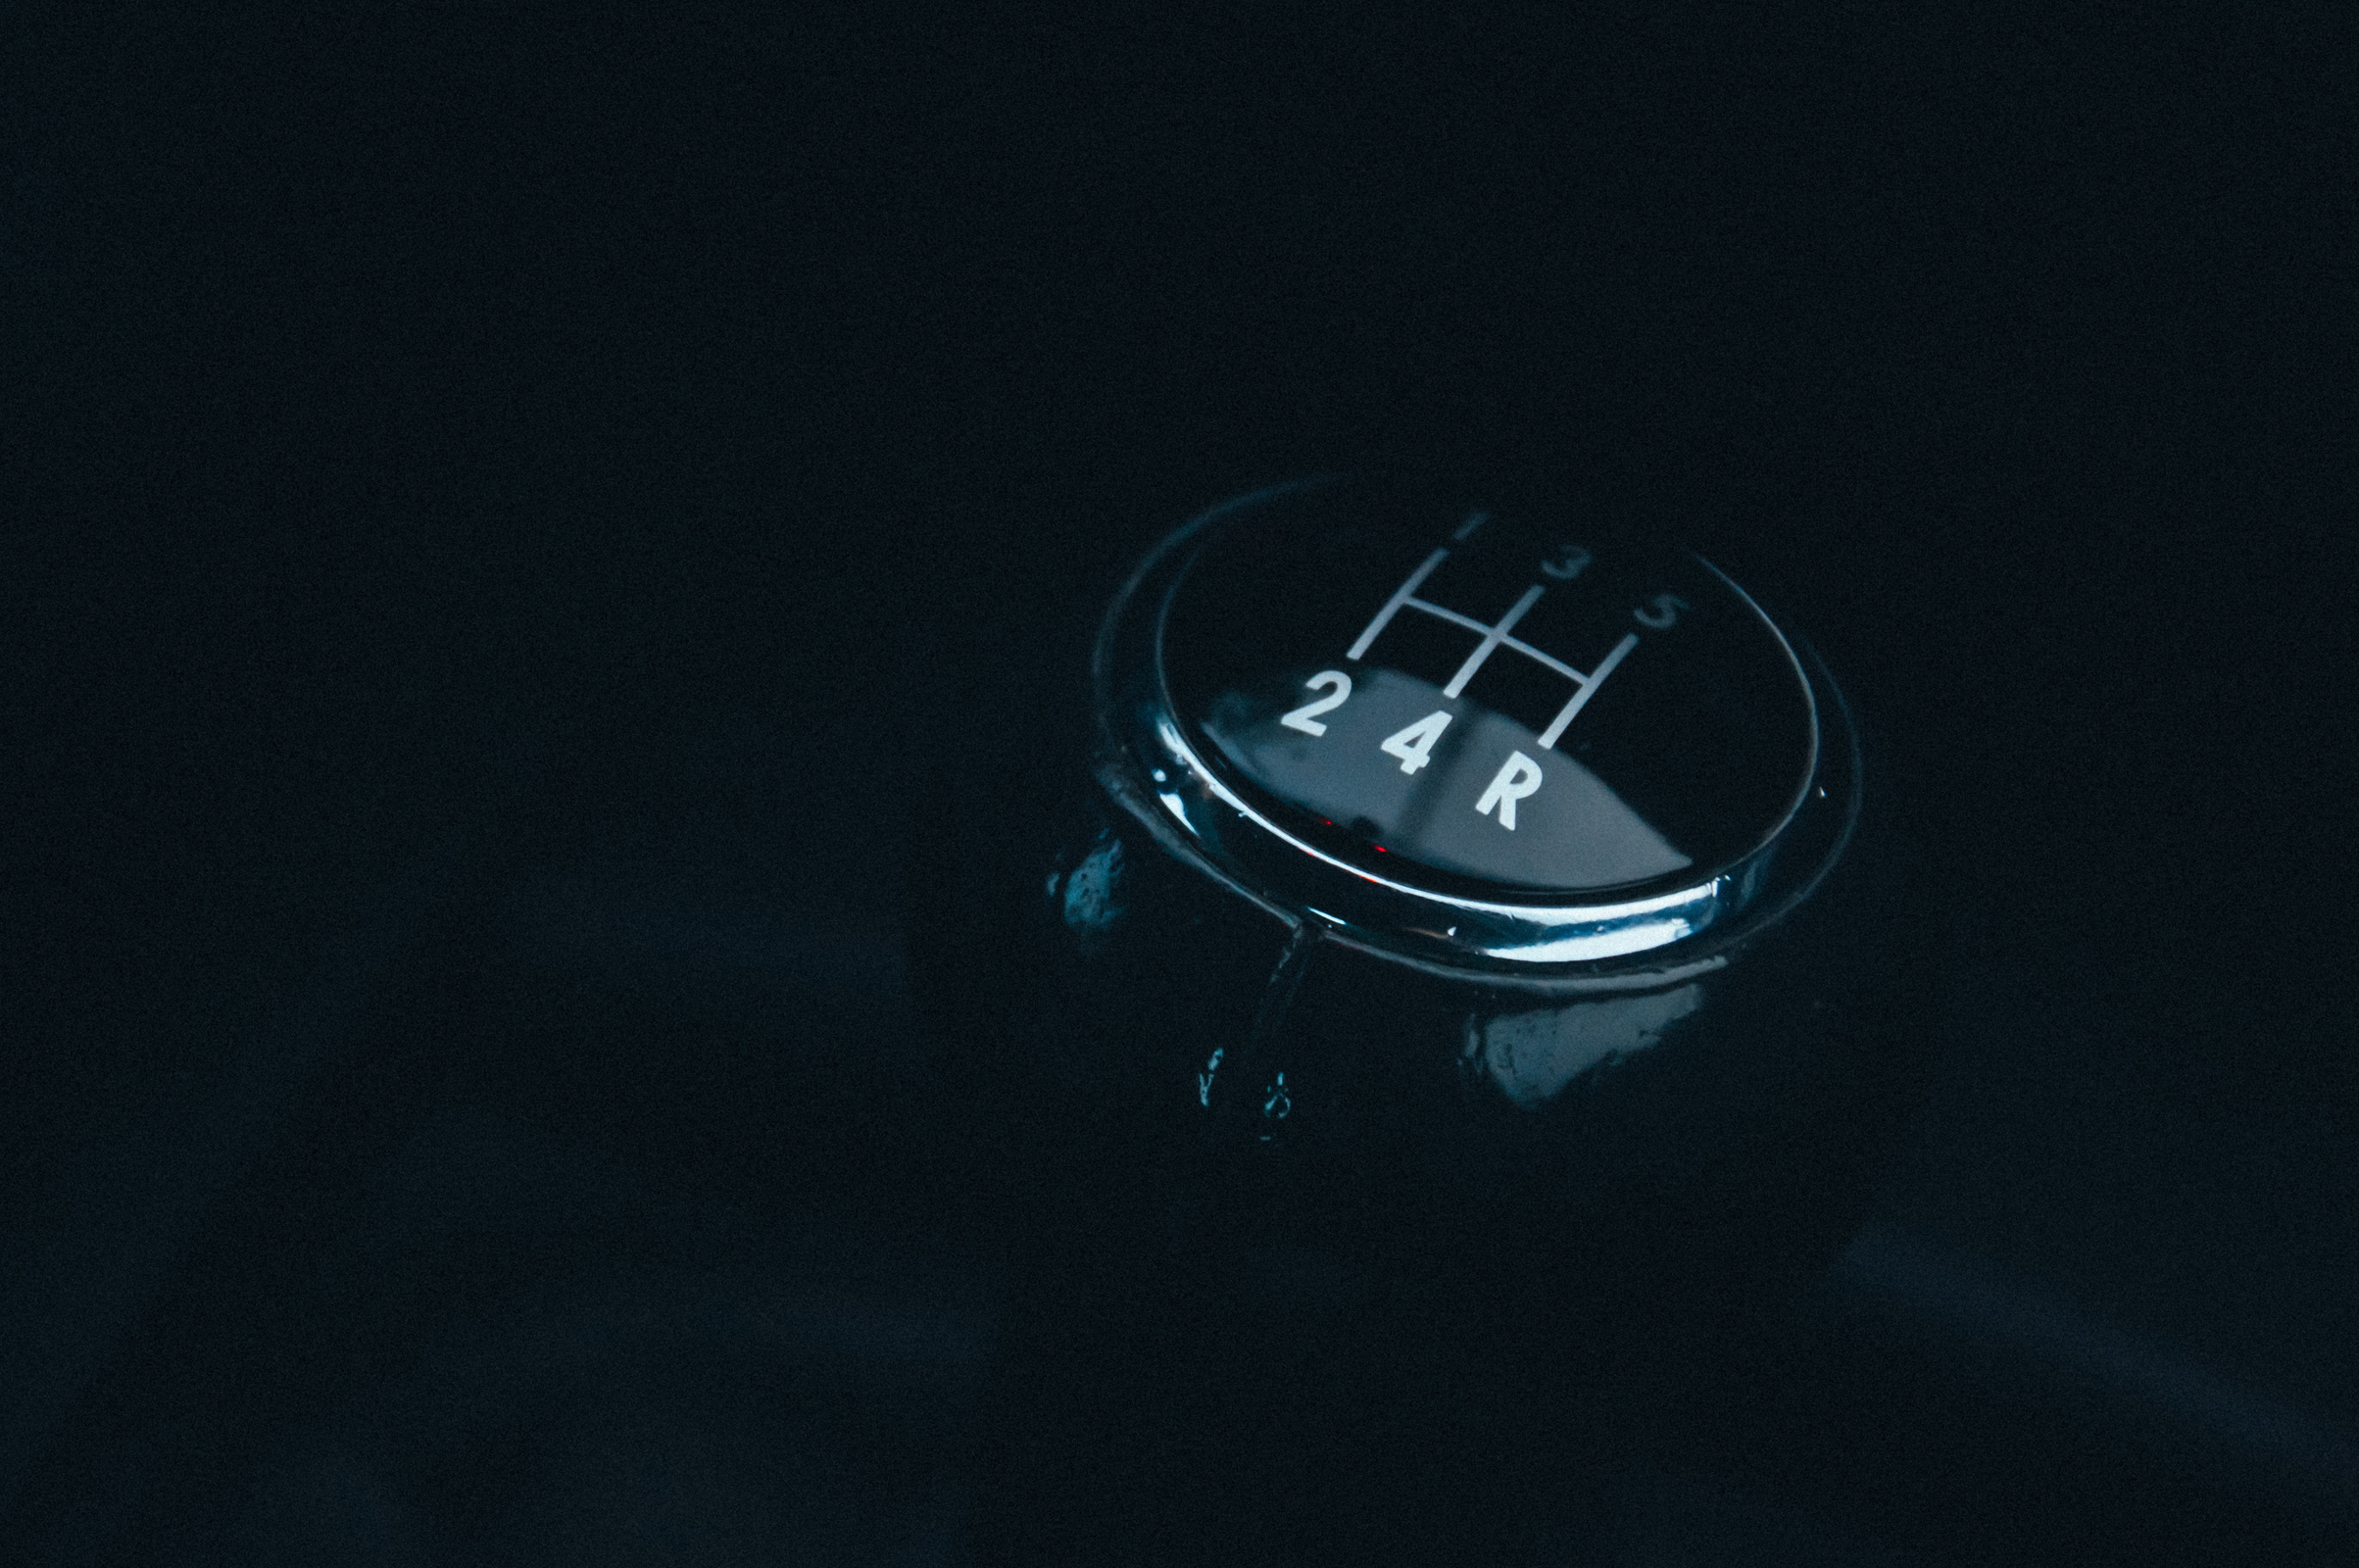 Closeup Photography of Vehicle Gear Shift Lever